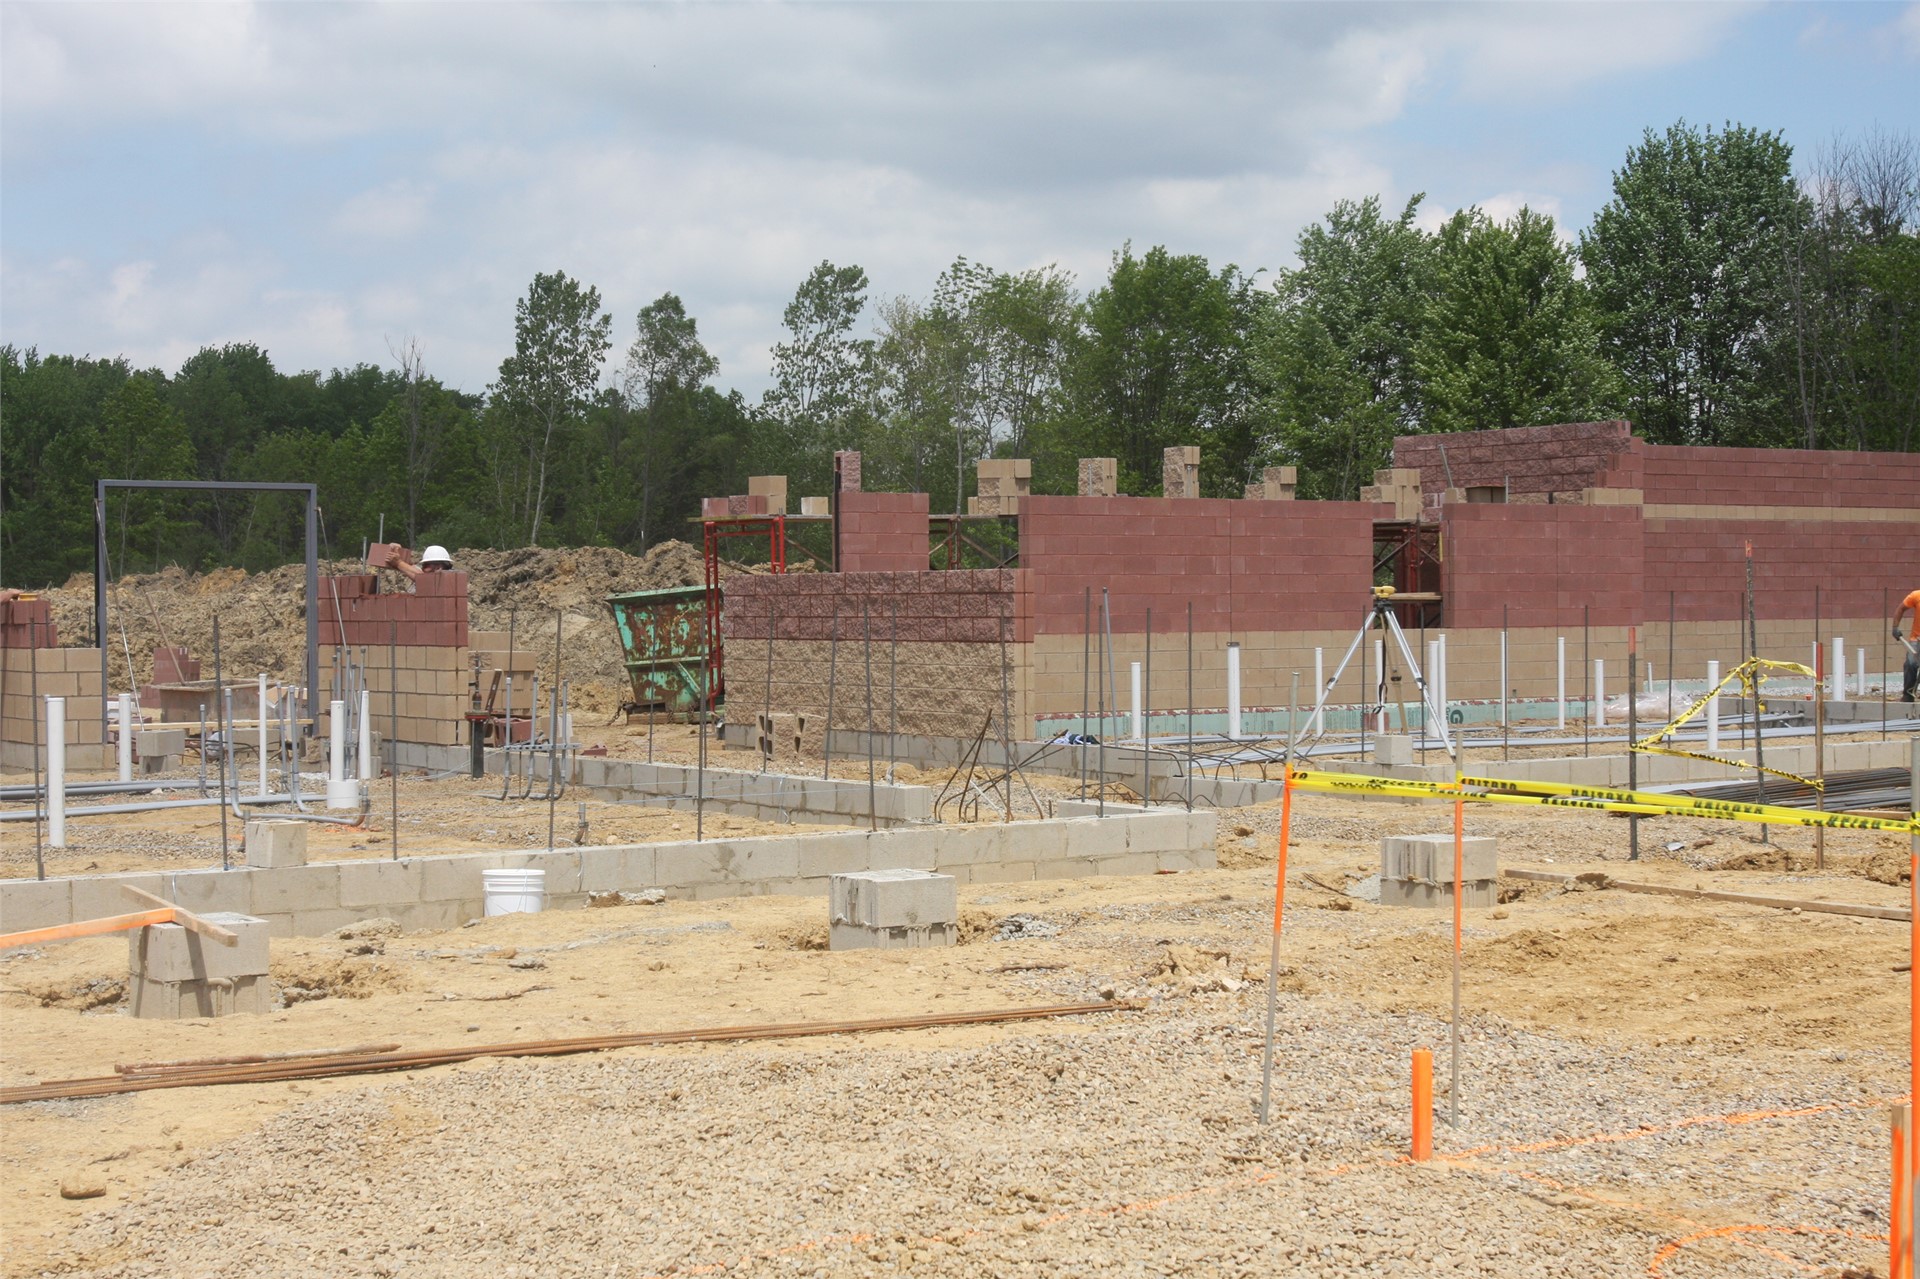 Concession area (left) and locker room/restroom area (right)—East side of building